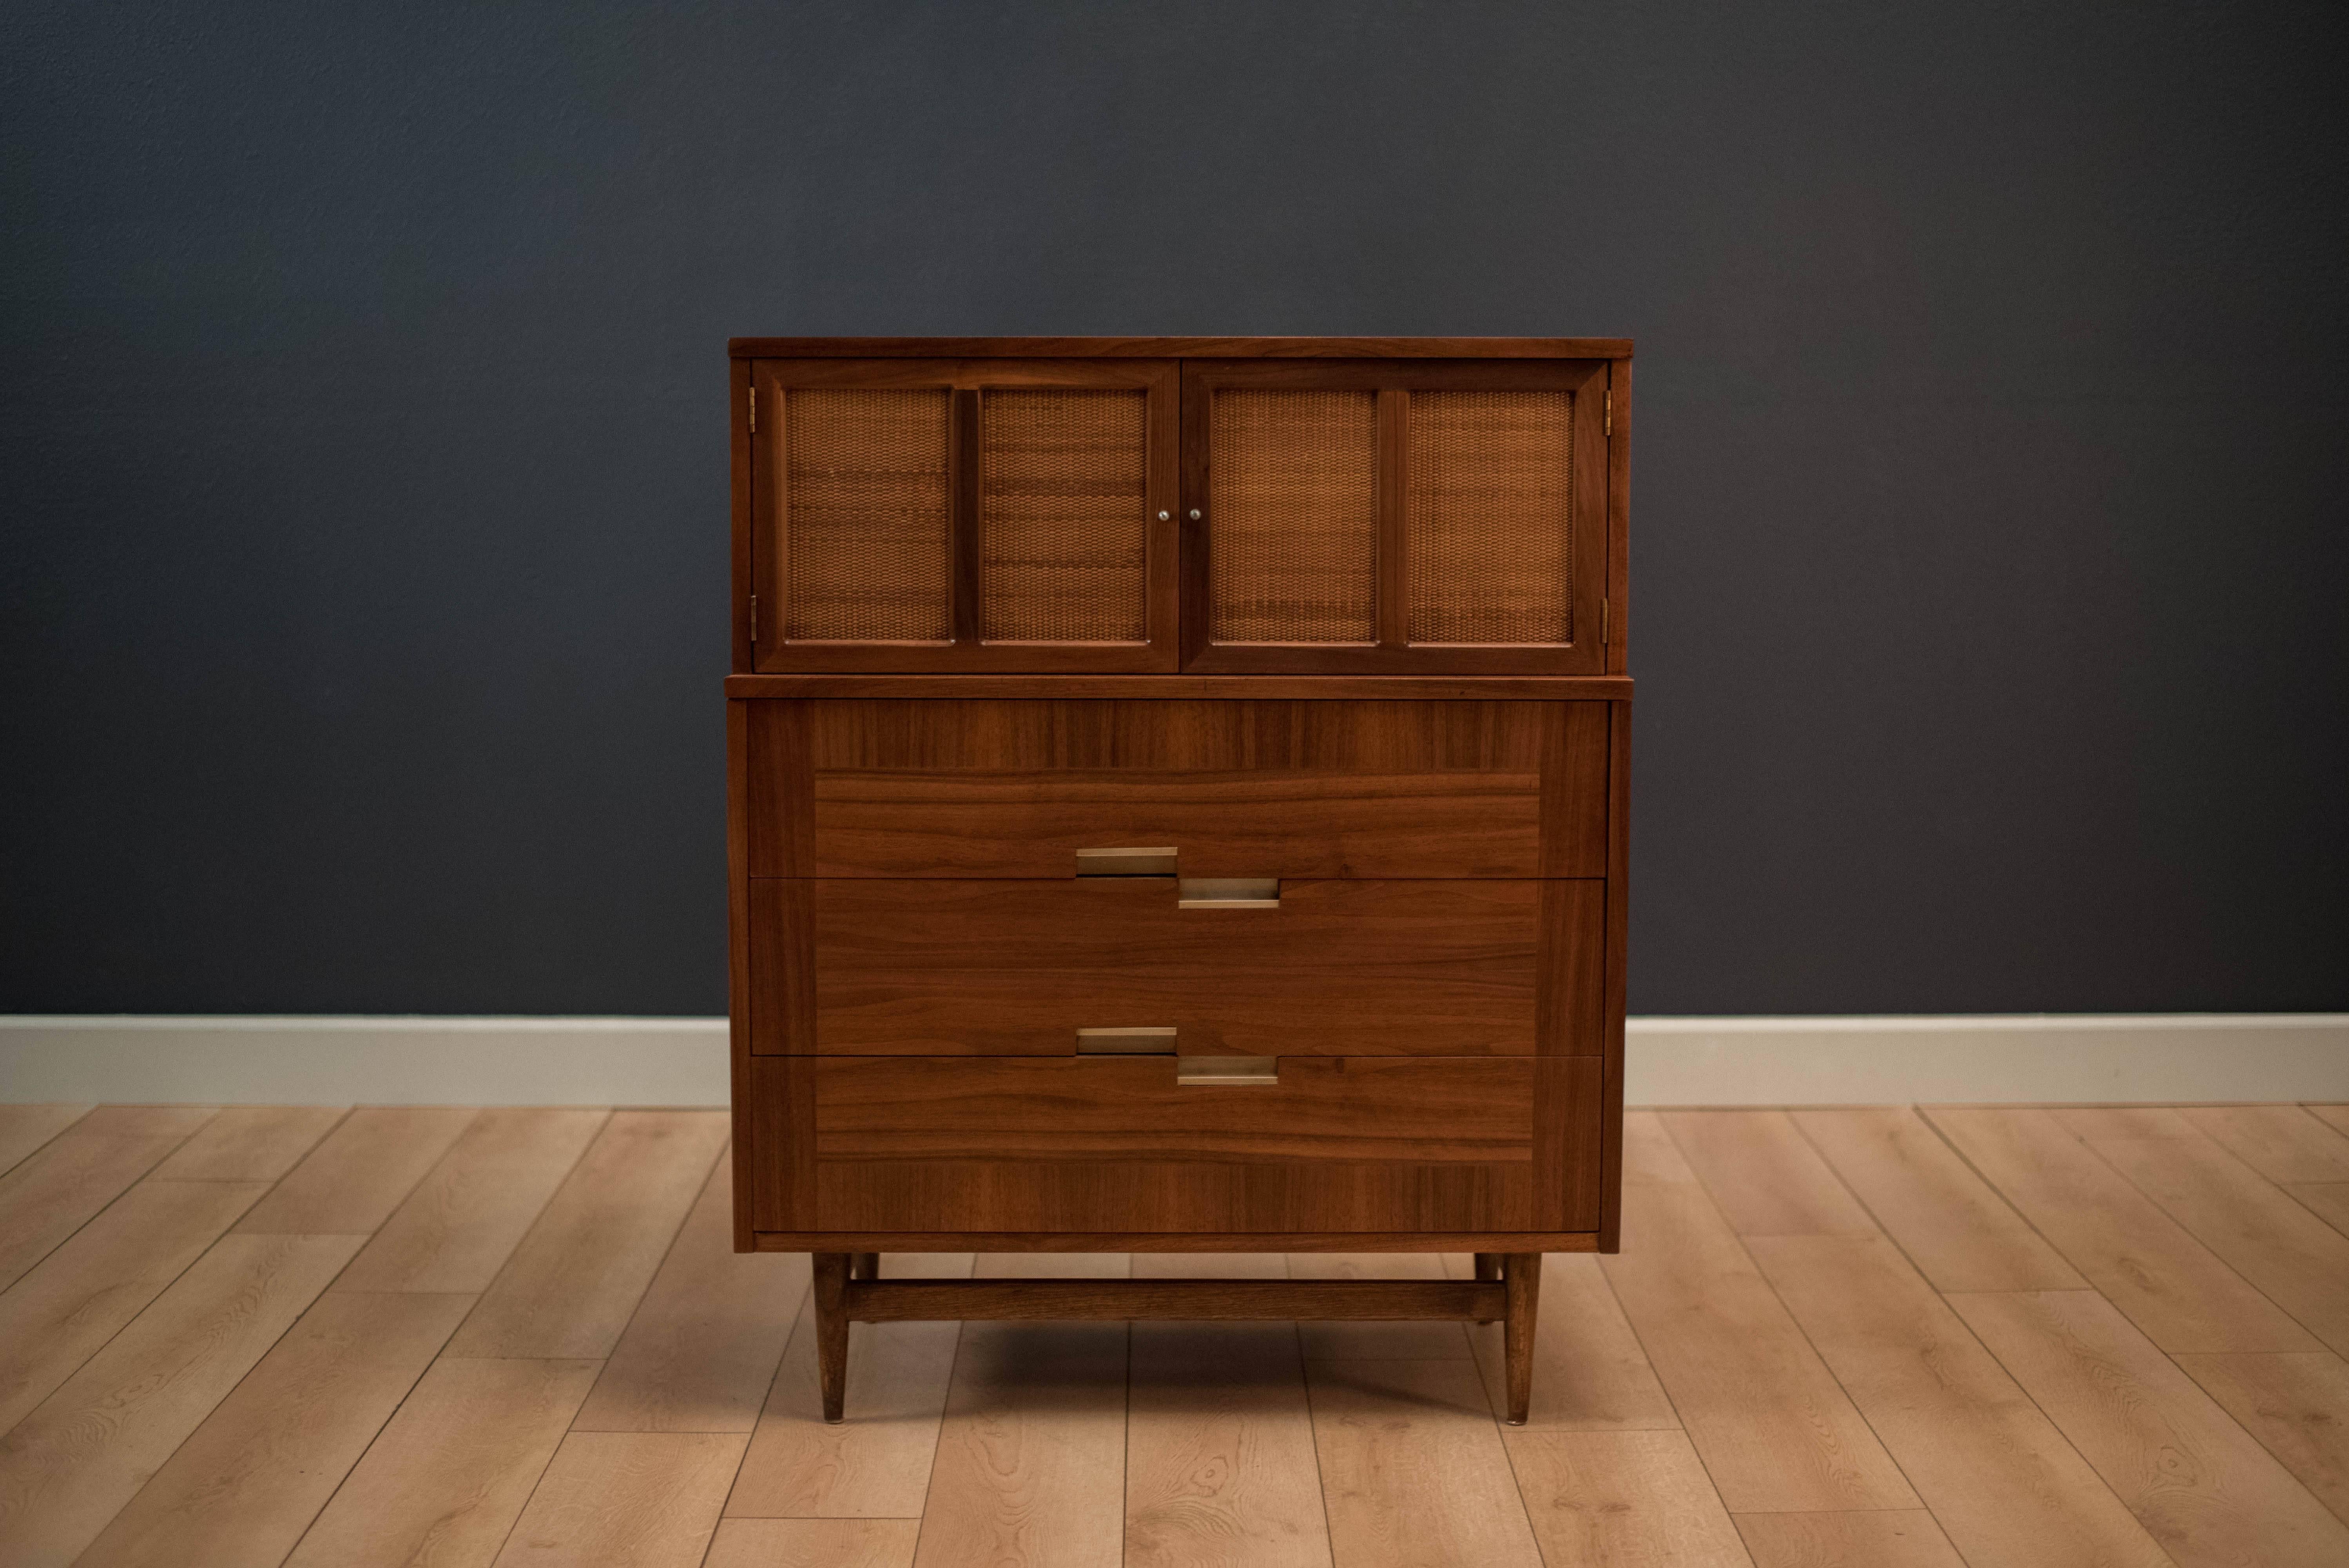 Midcentury Highboy dresser by American of Martinsville in walnut. This piece includes five spacious drawers with picture frame opposing wood veneers. Features the line's signature aluminium handles and X inlay.